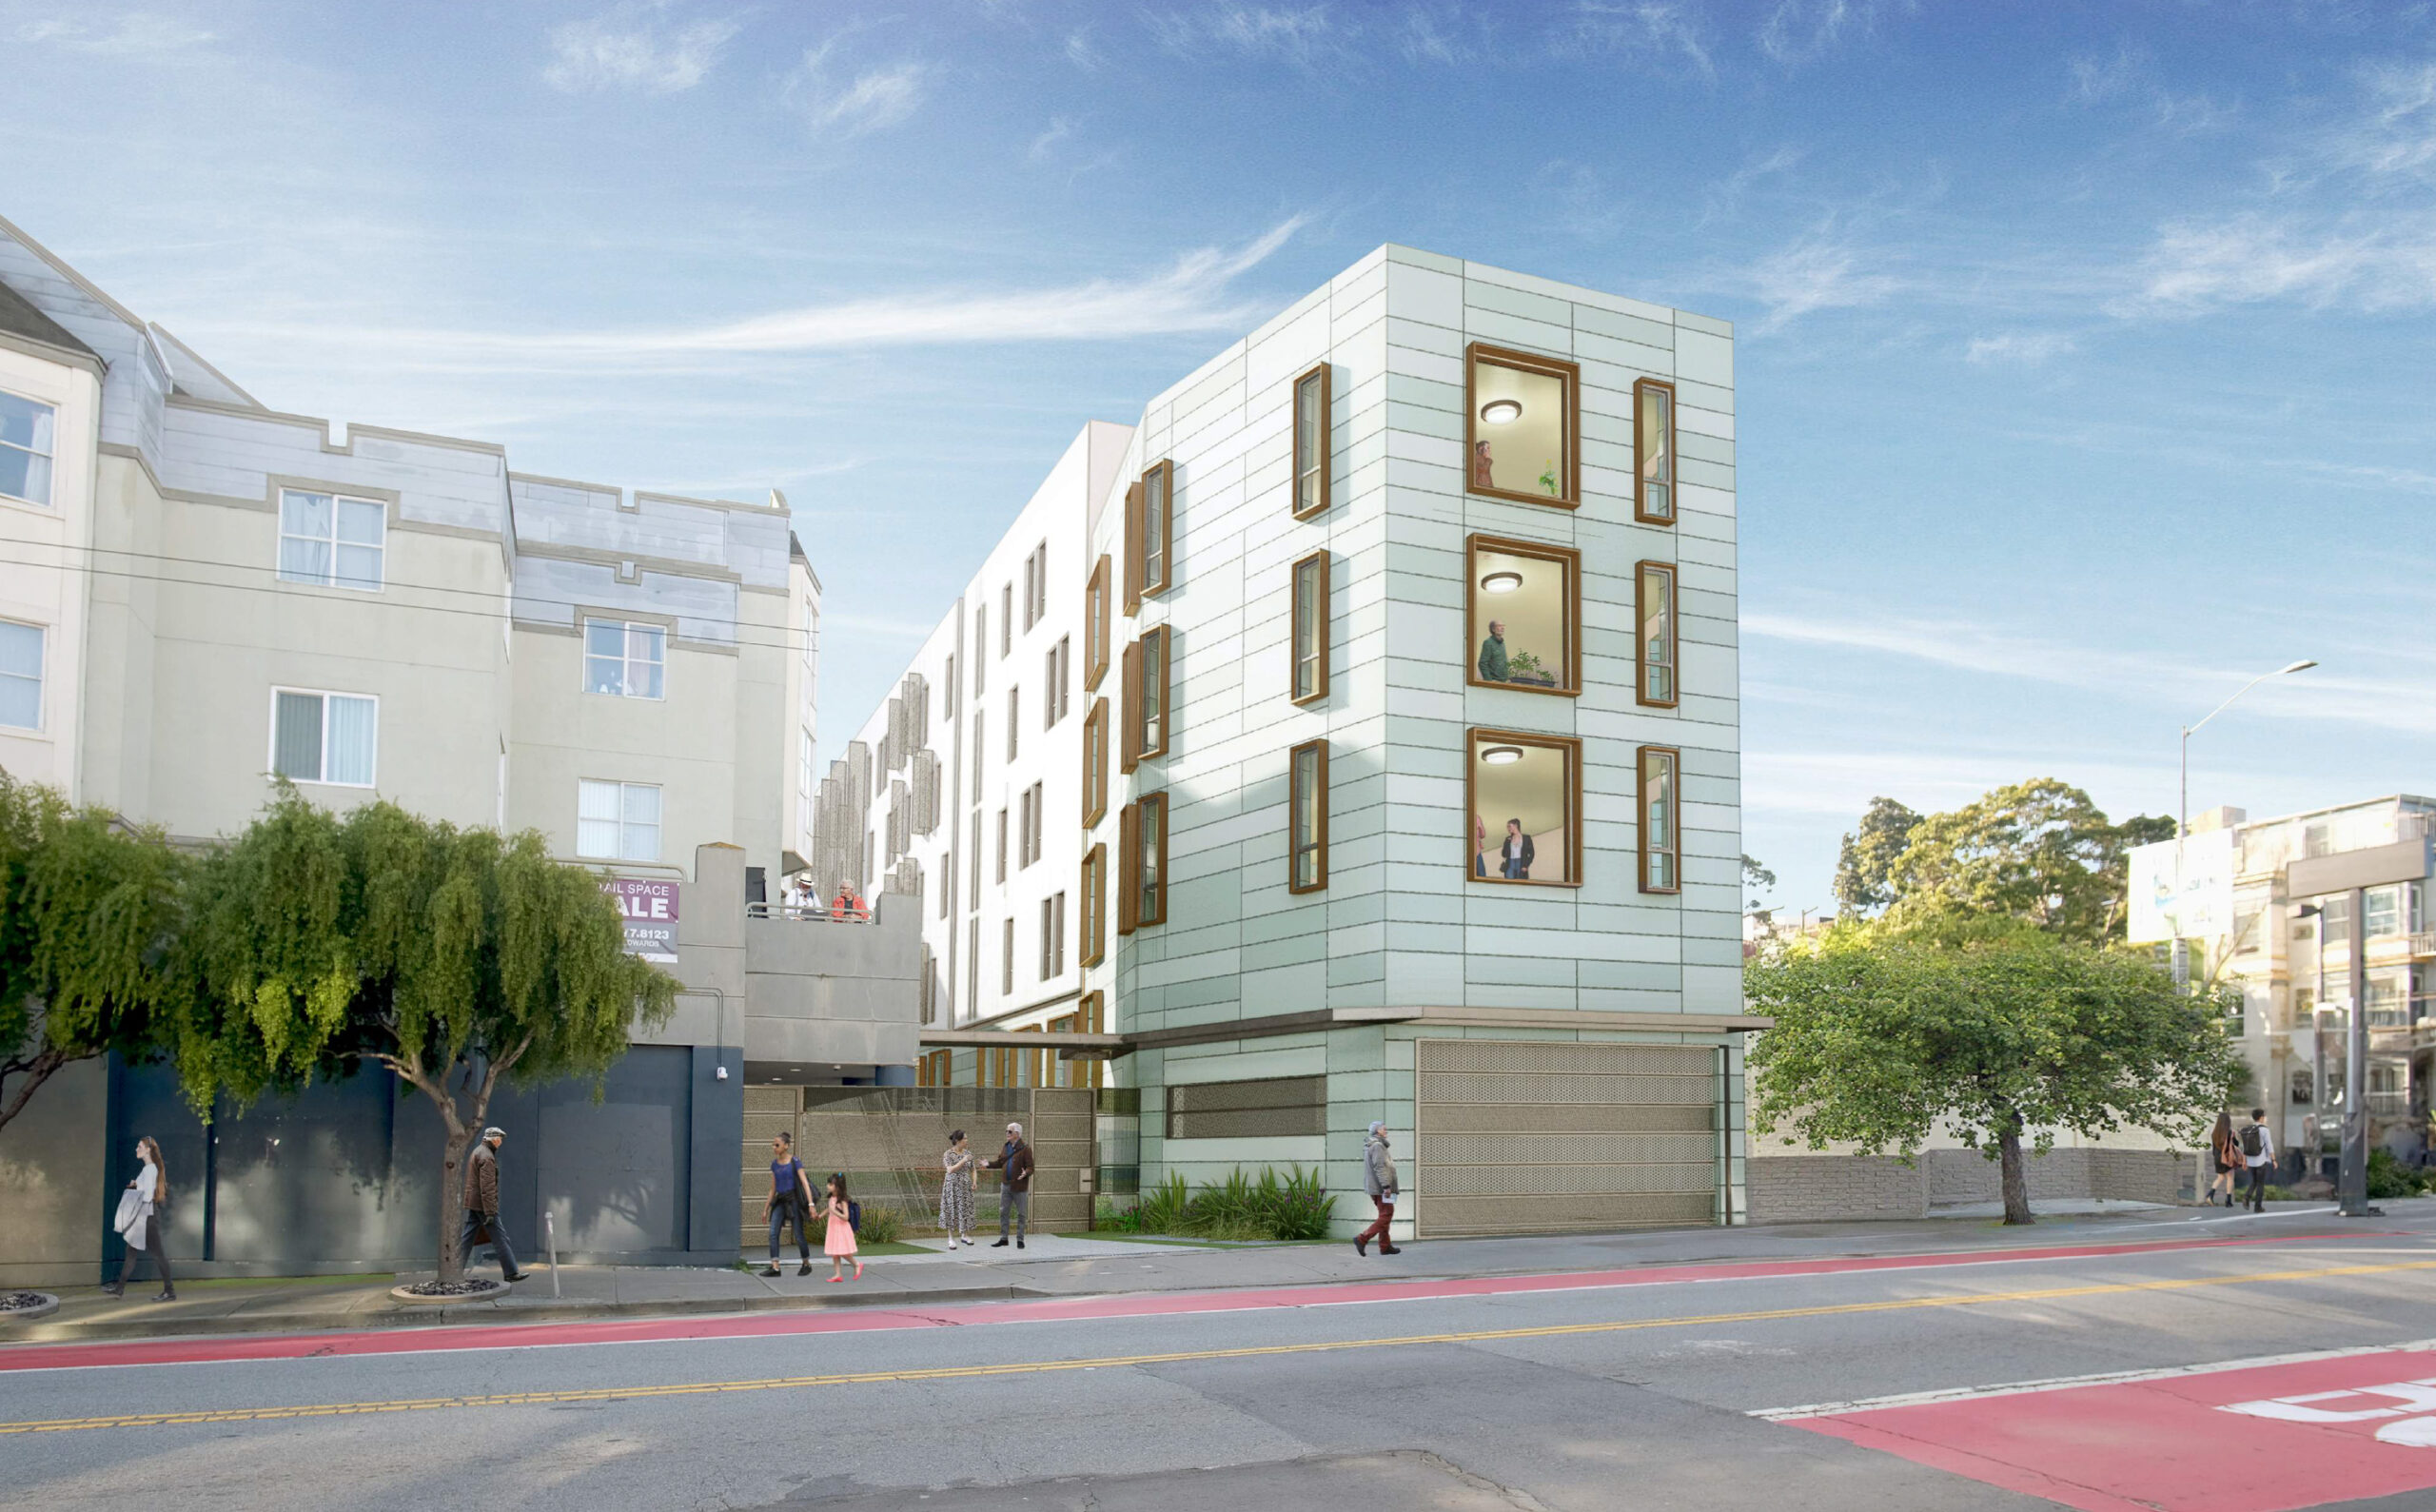 3333 Mission Street establishing view, rendering by BAR Architects